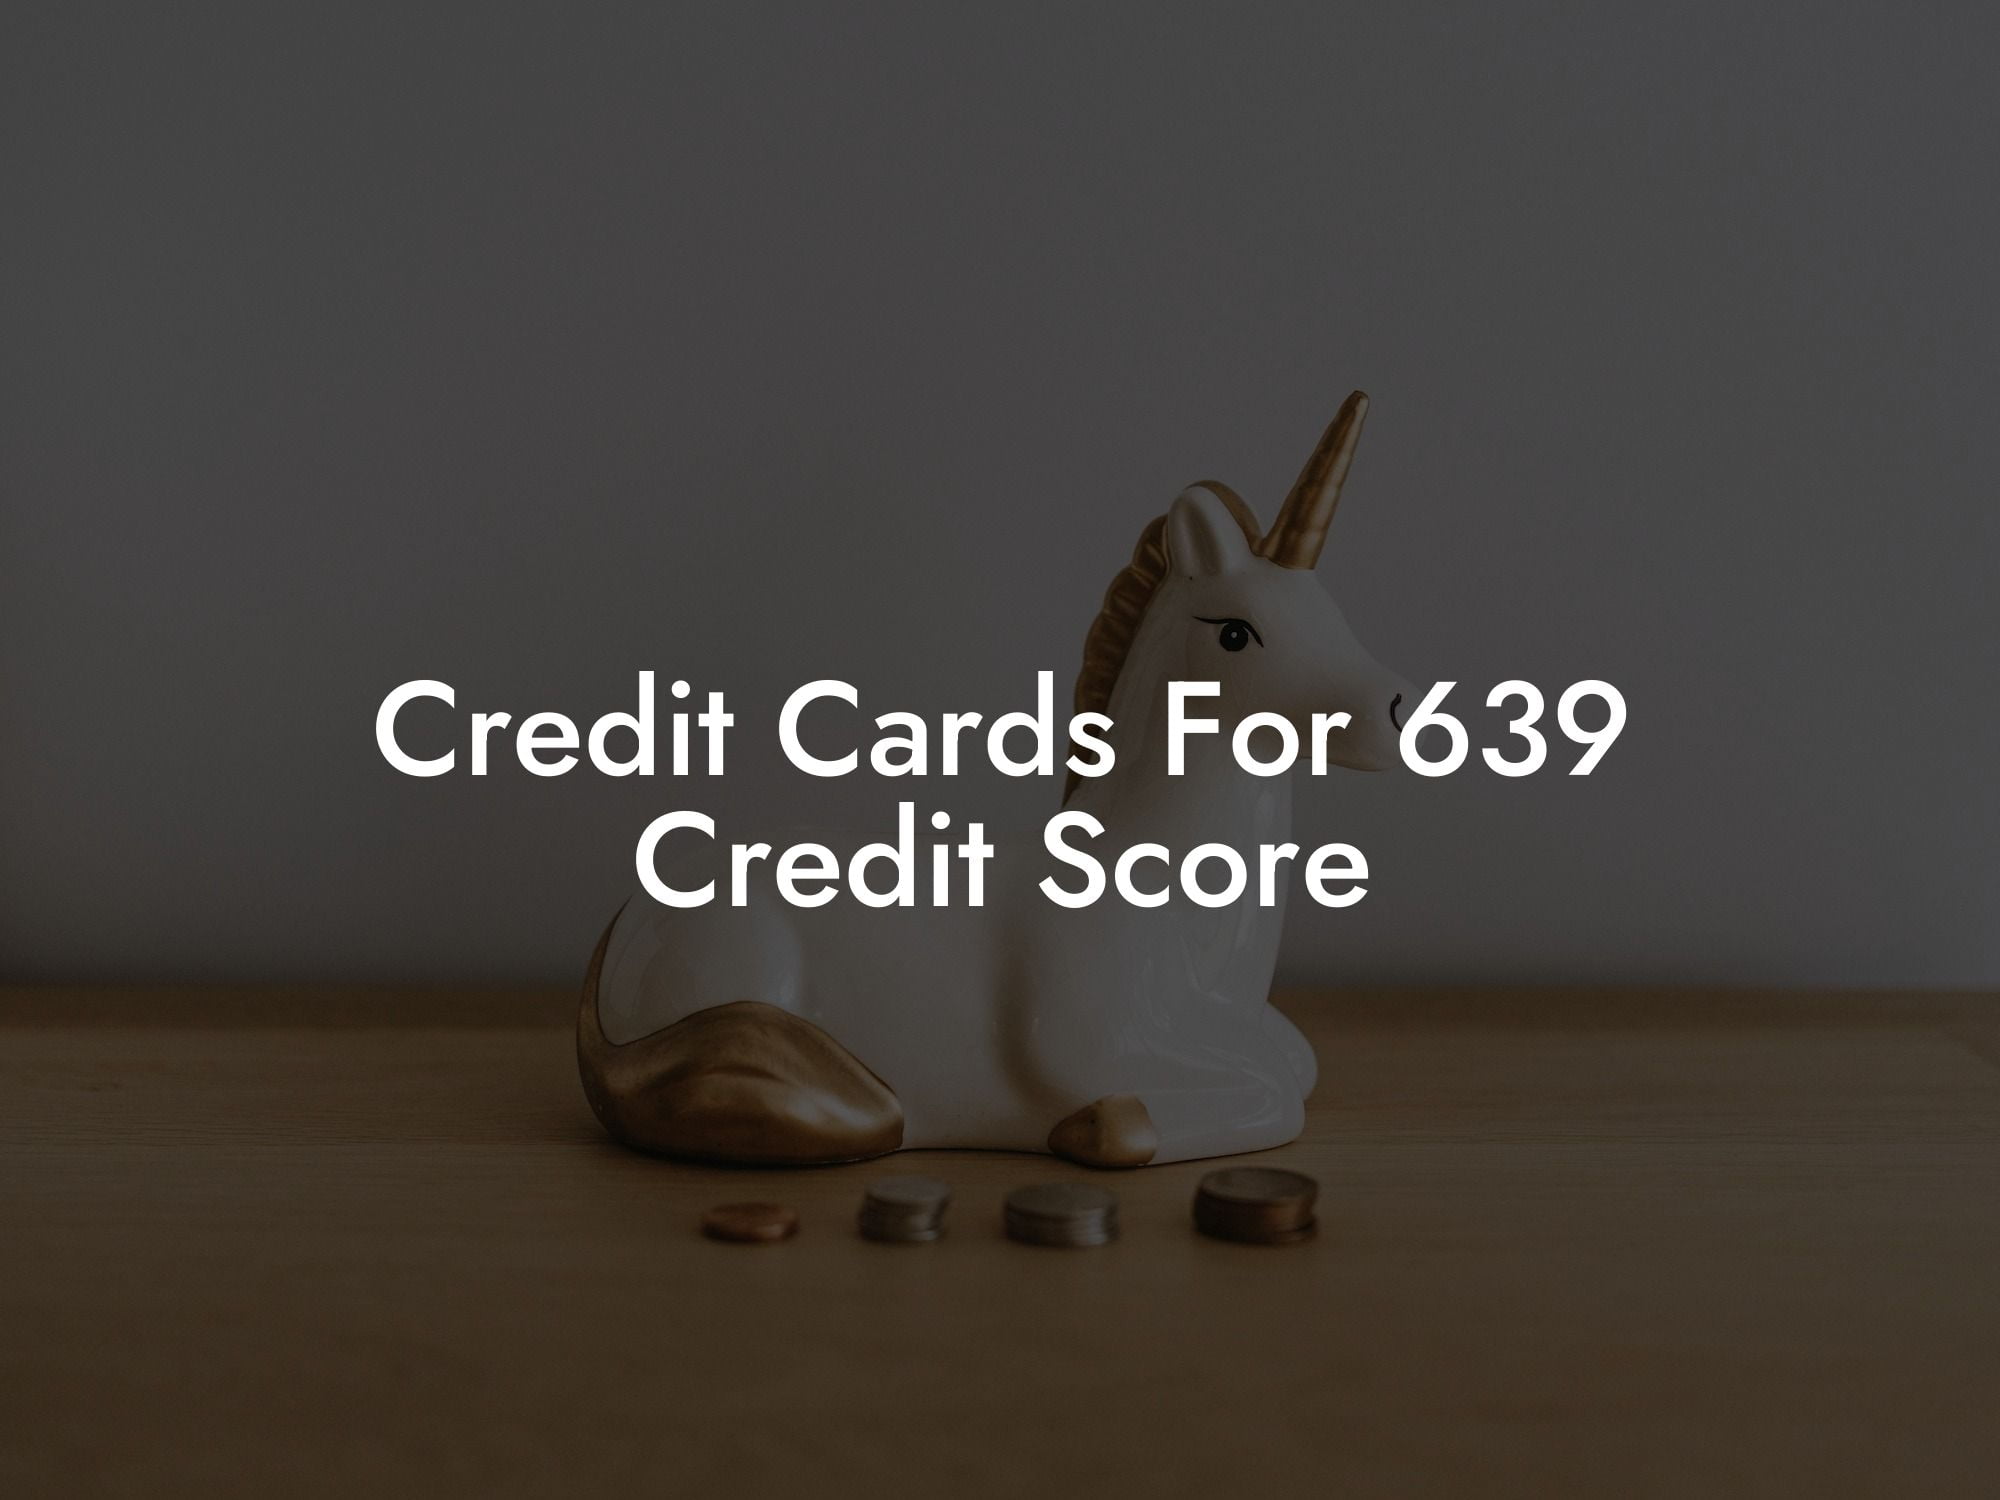 Credit Cards For 639 Credit Score